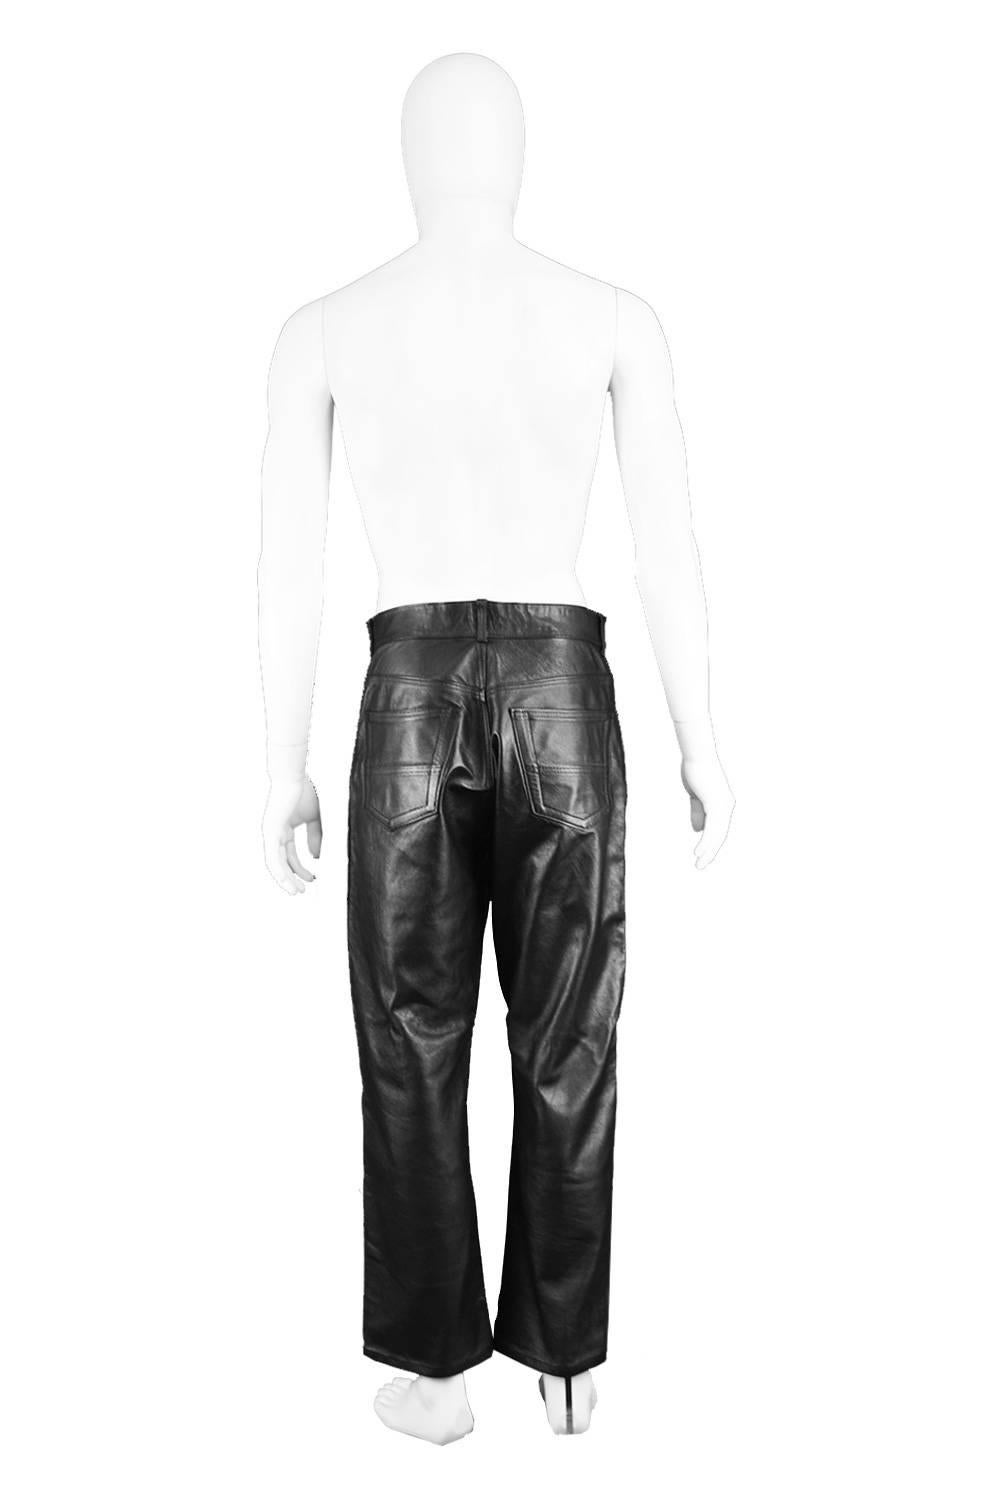 Paul Smith Men's Vintage Black Real Leather Straight Leg Pants, 1990s For Sale 6